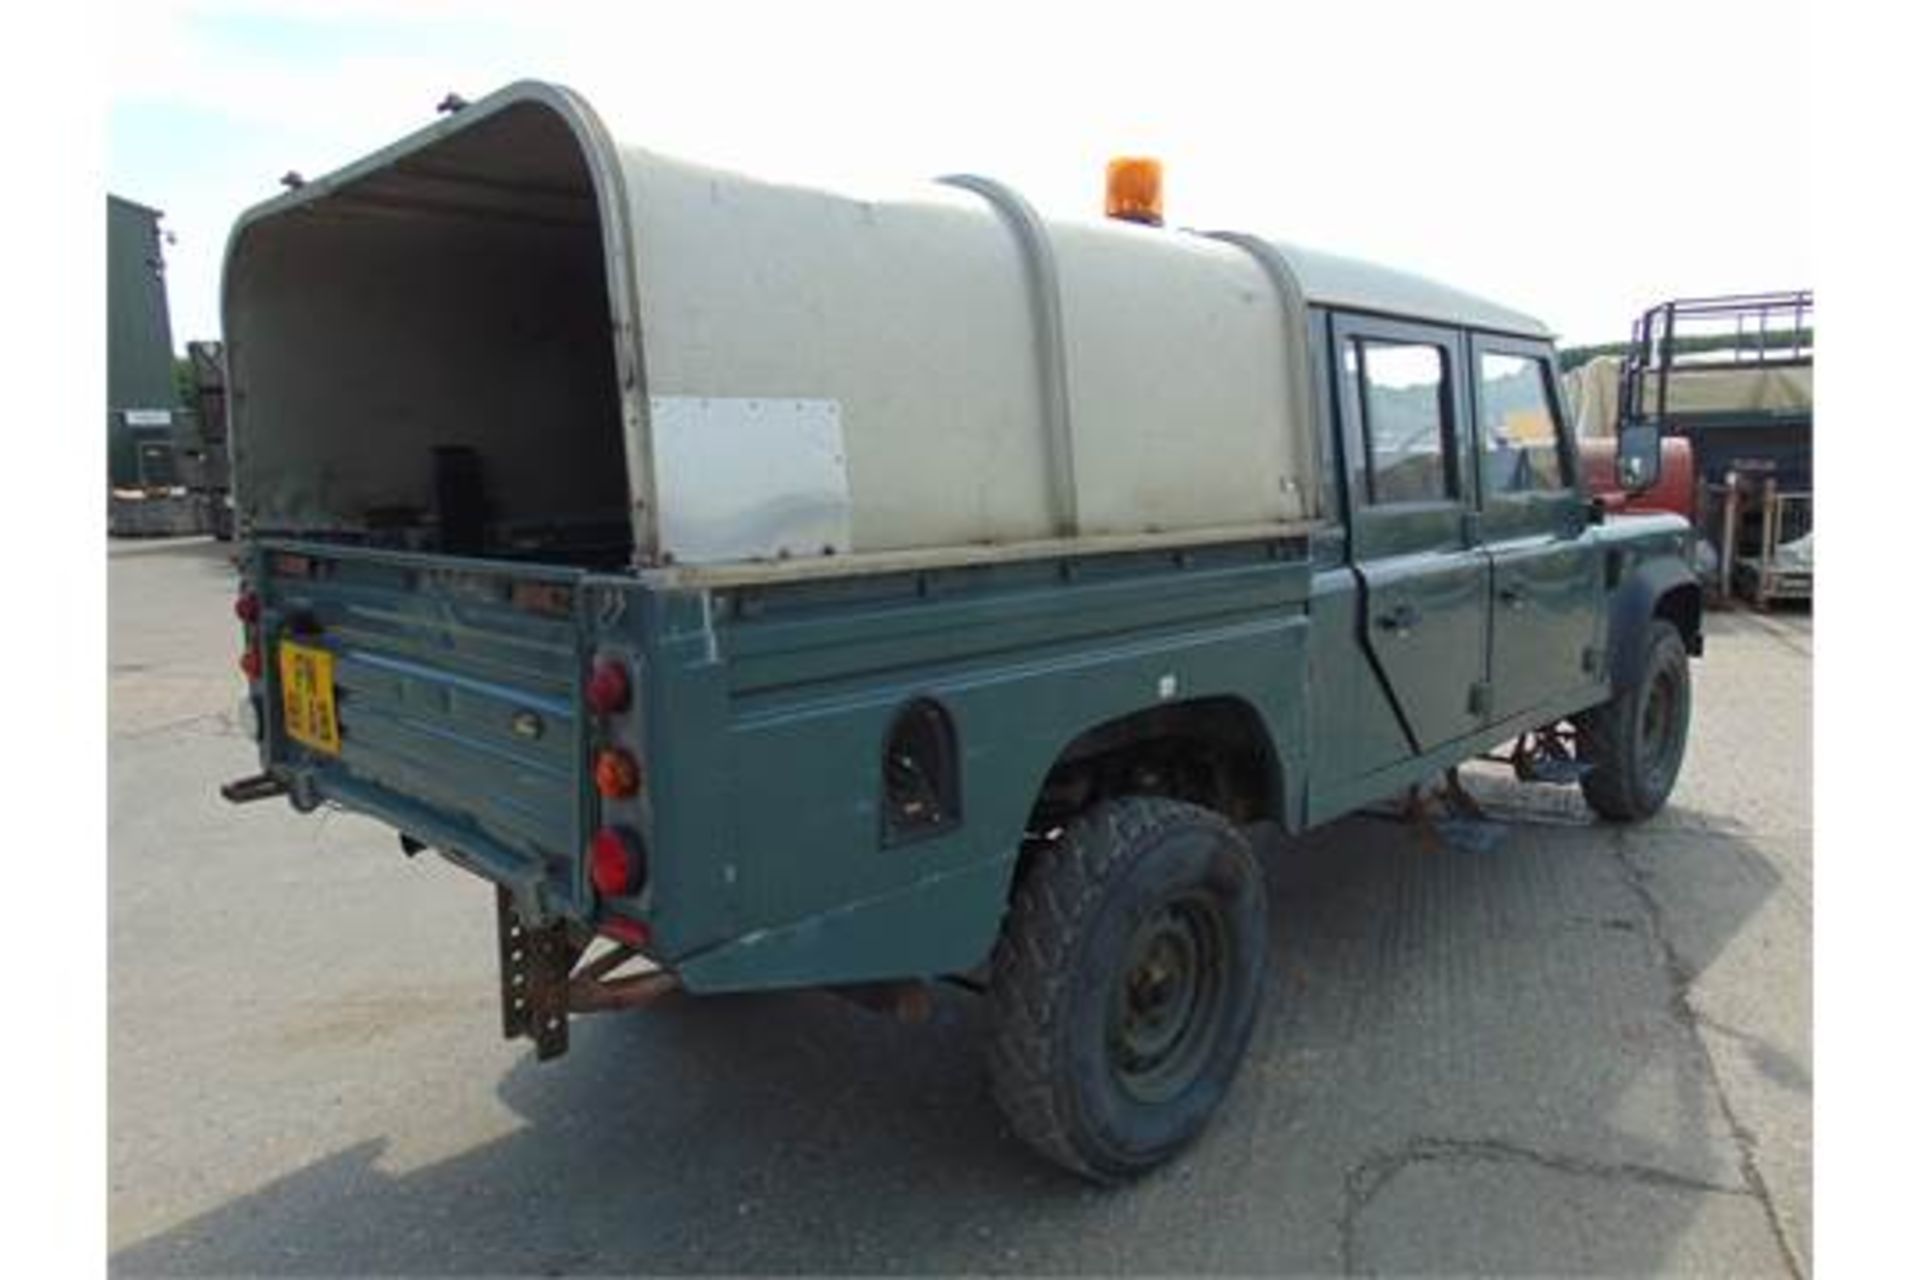 Land Rover Defender 130 TD5 Double Cab Pick Up - Image 8 of 17